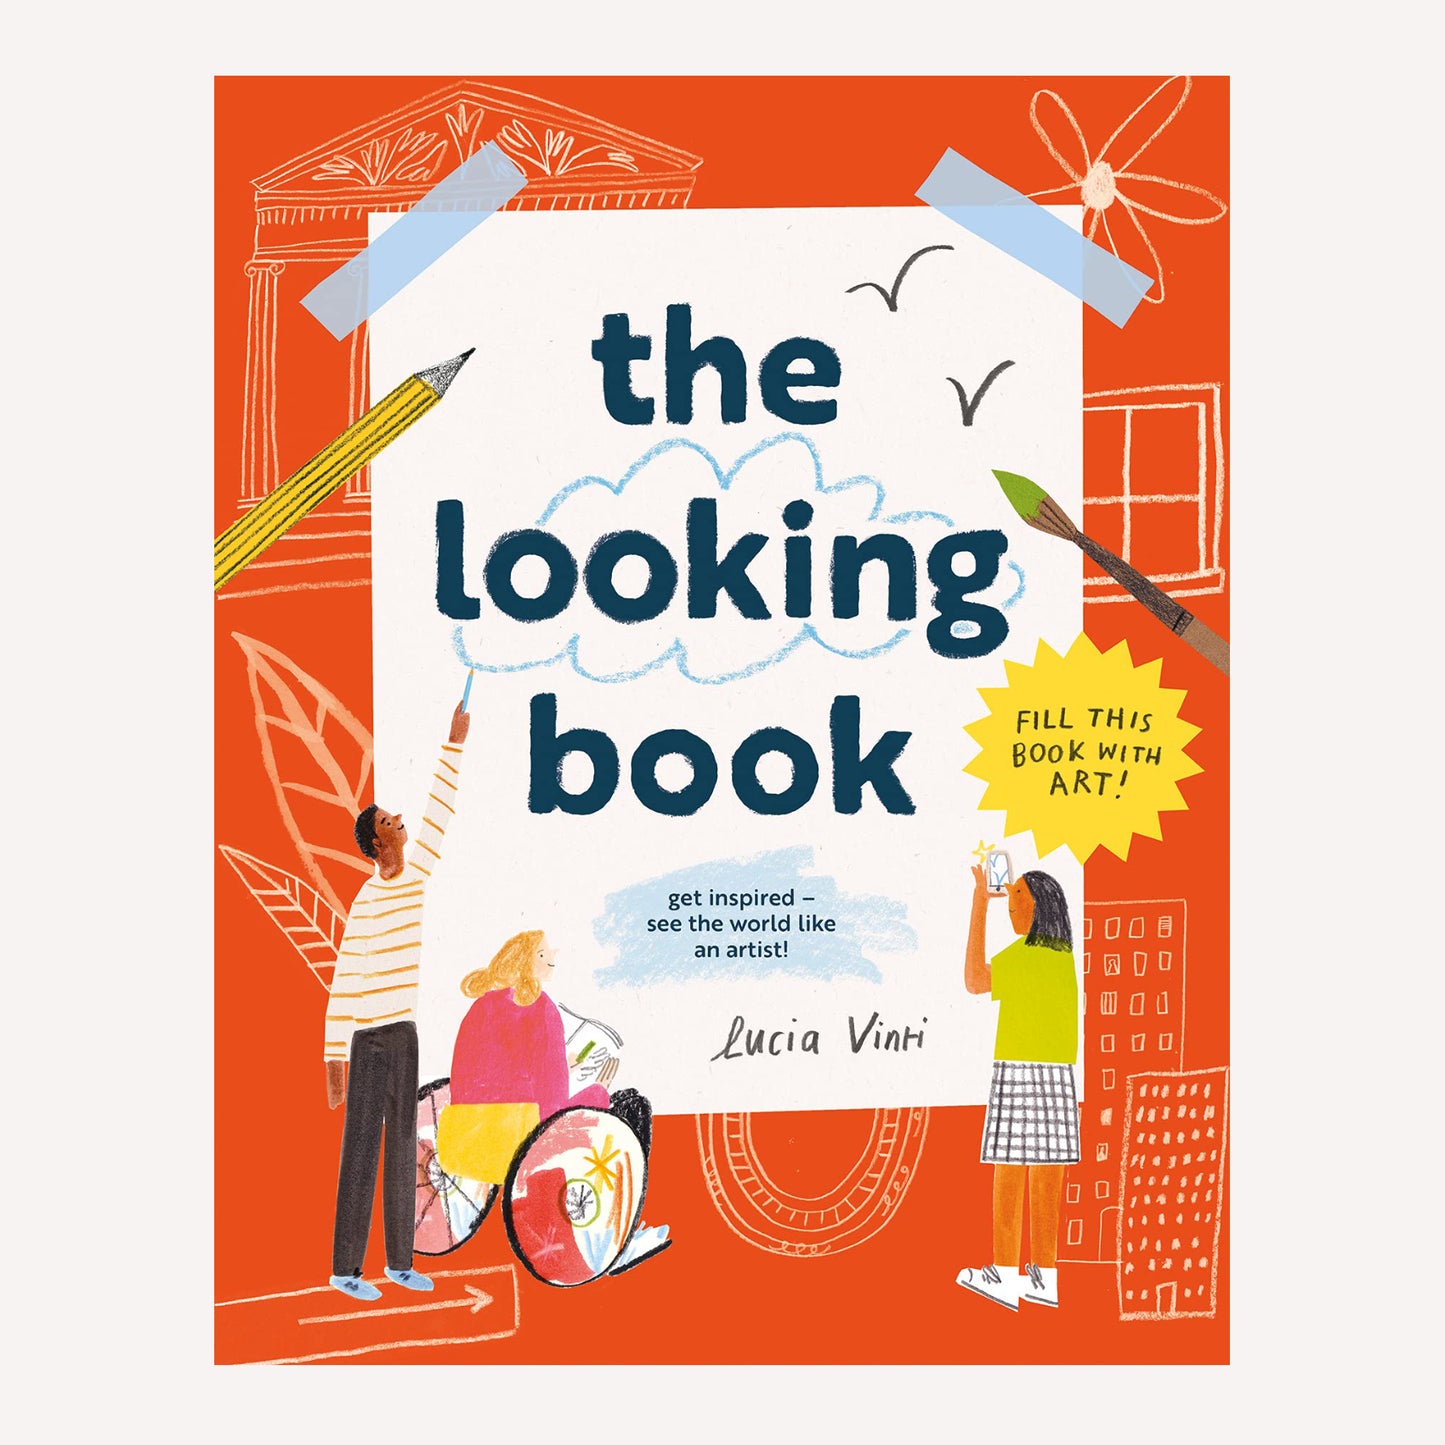 Book cover titled “The Looking Book” by Lucia Vinti. The orange cover features illustrations of people doodling, sketching and taking photos. 